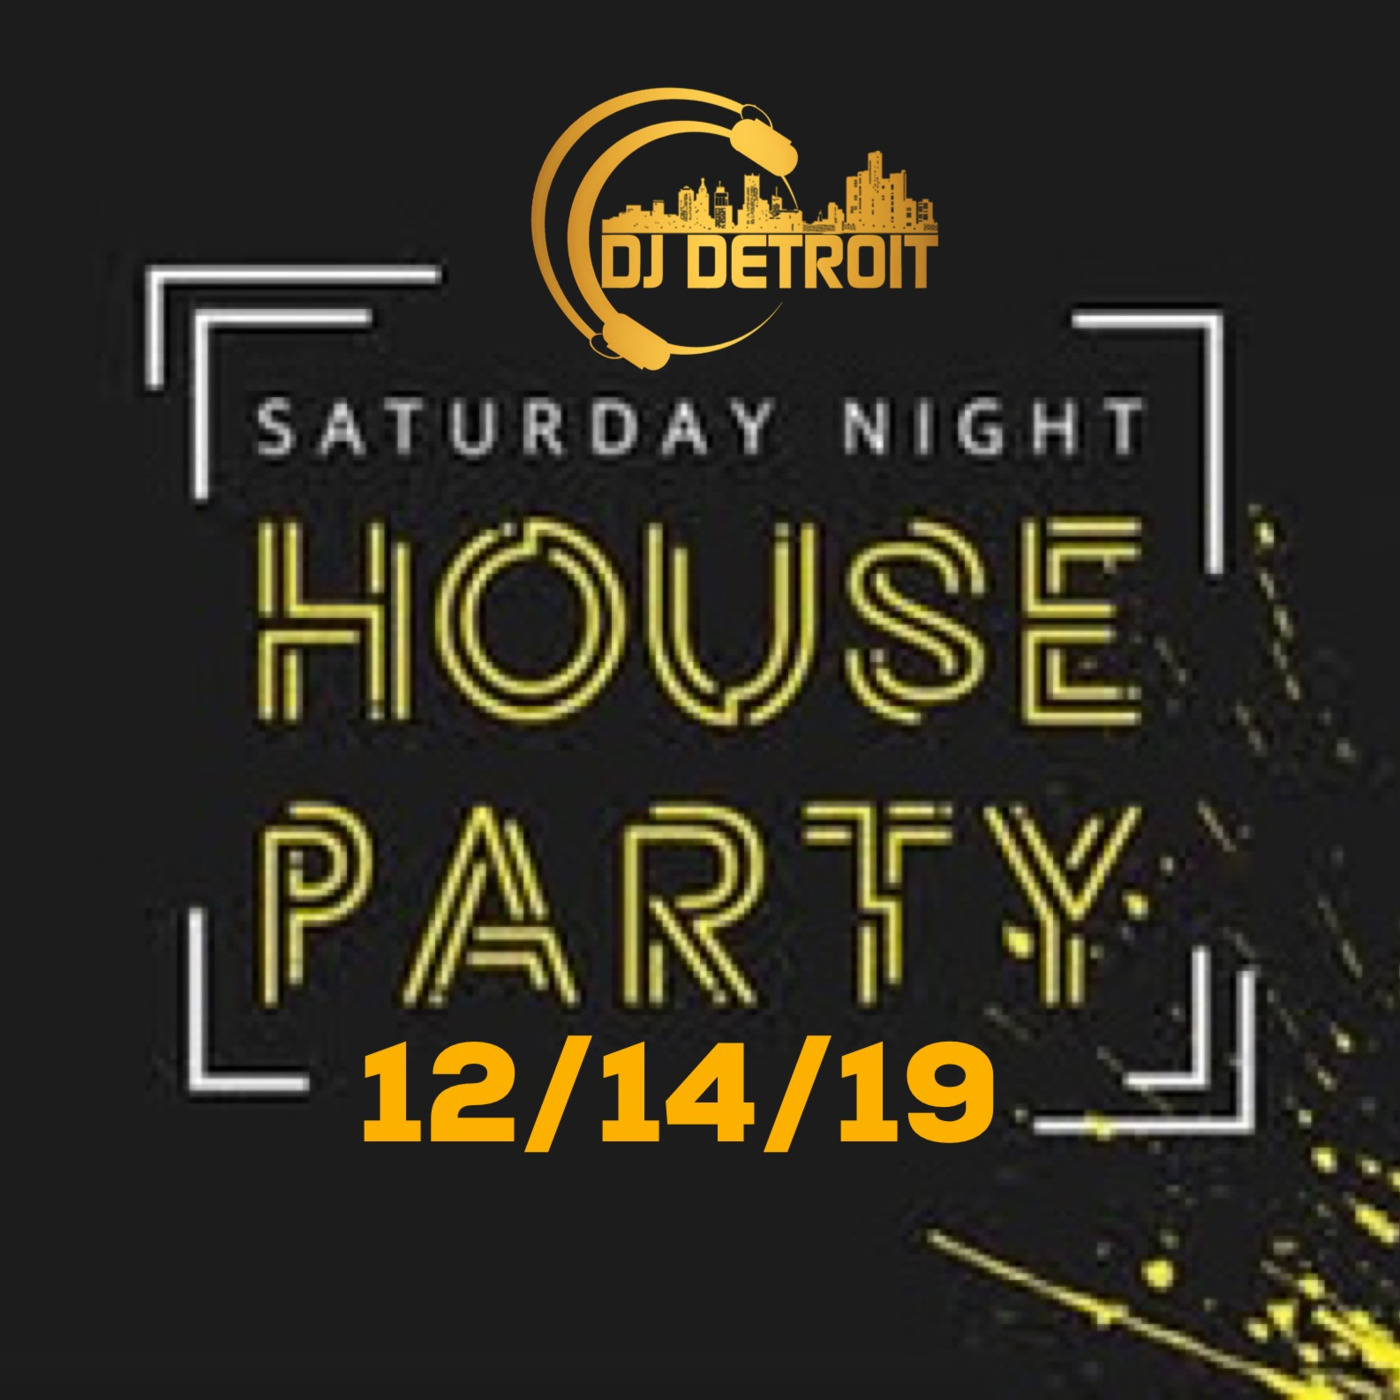 12/14/19 Saturday Night House Party